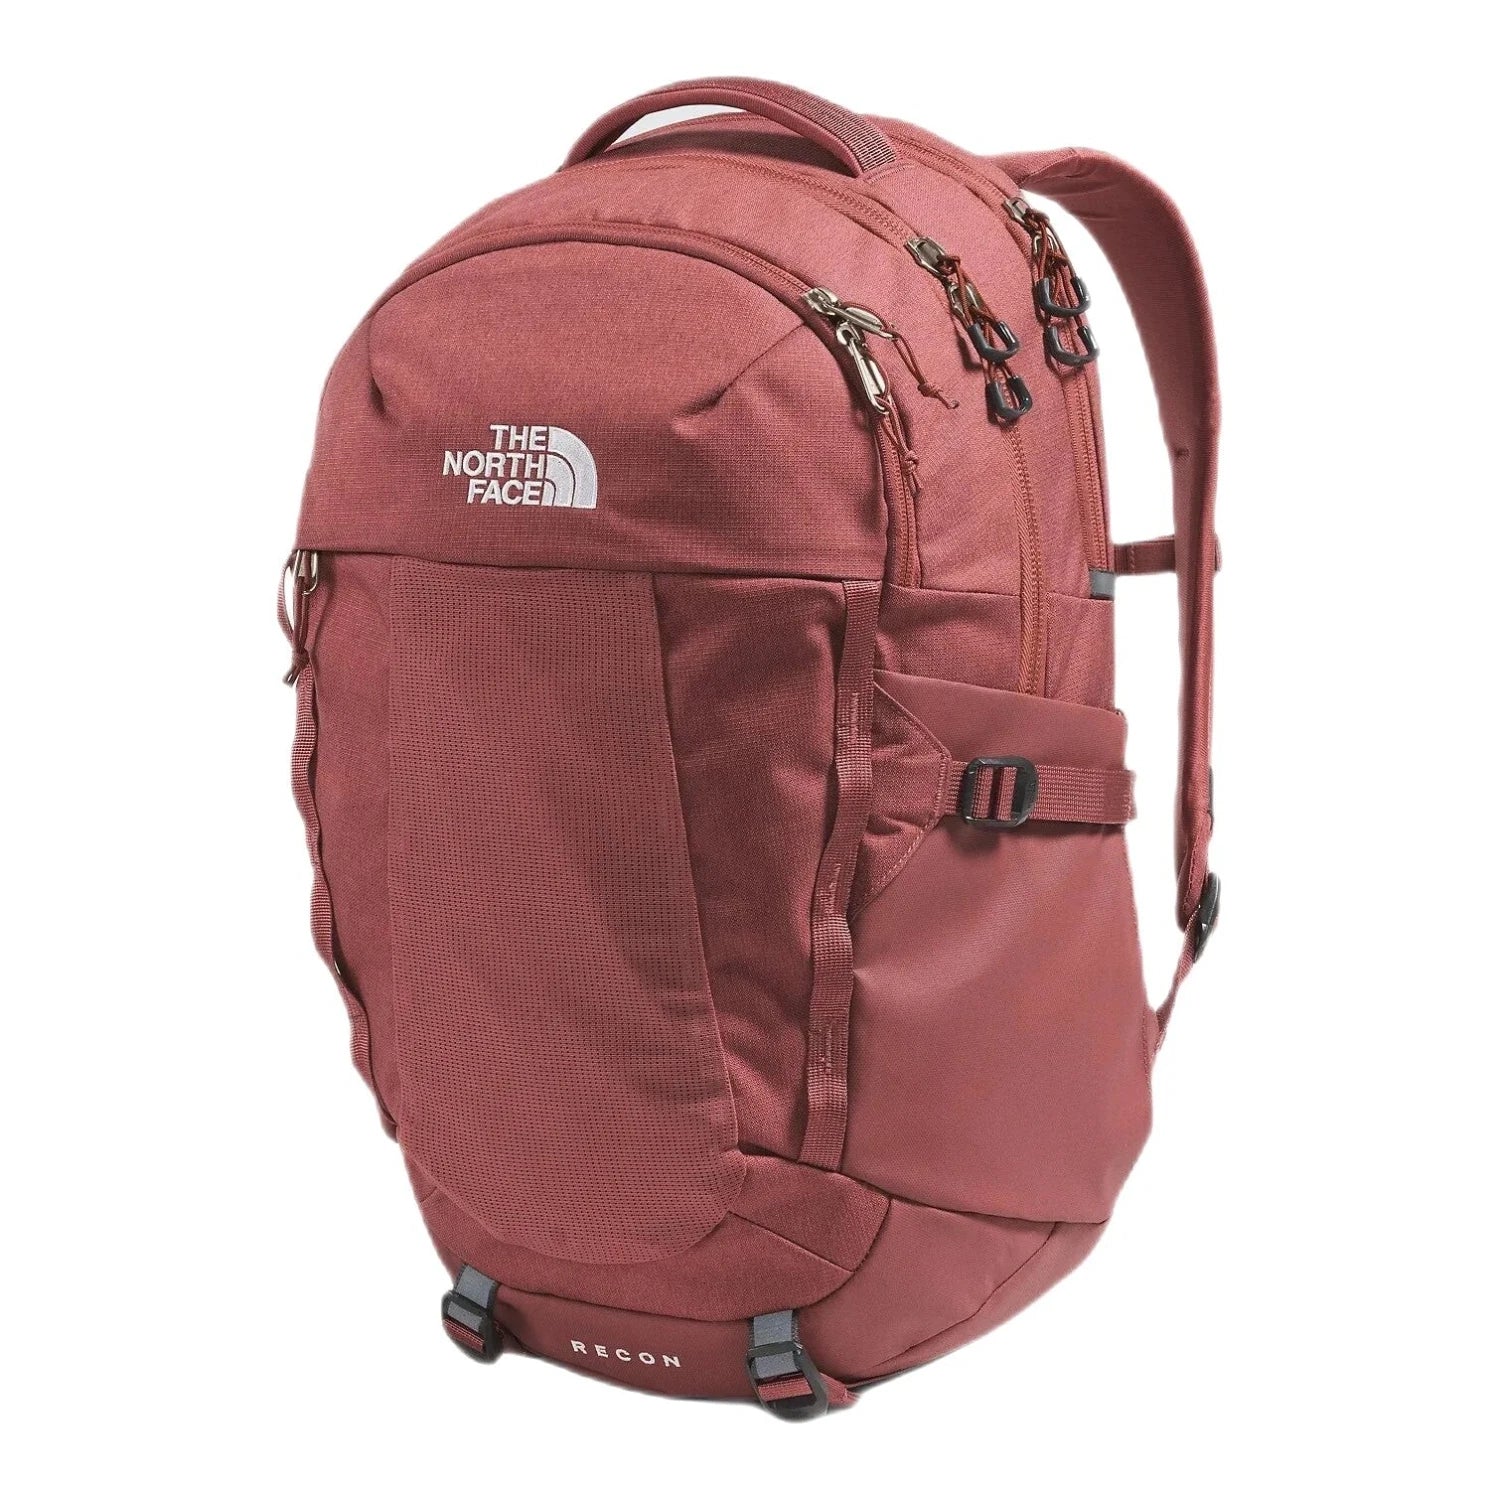 The North Face Women's Recon Backpack Canyon Dust Front